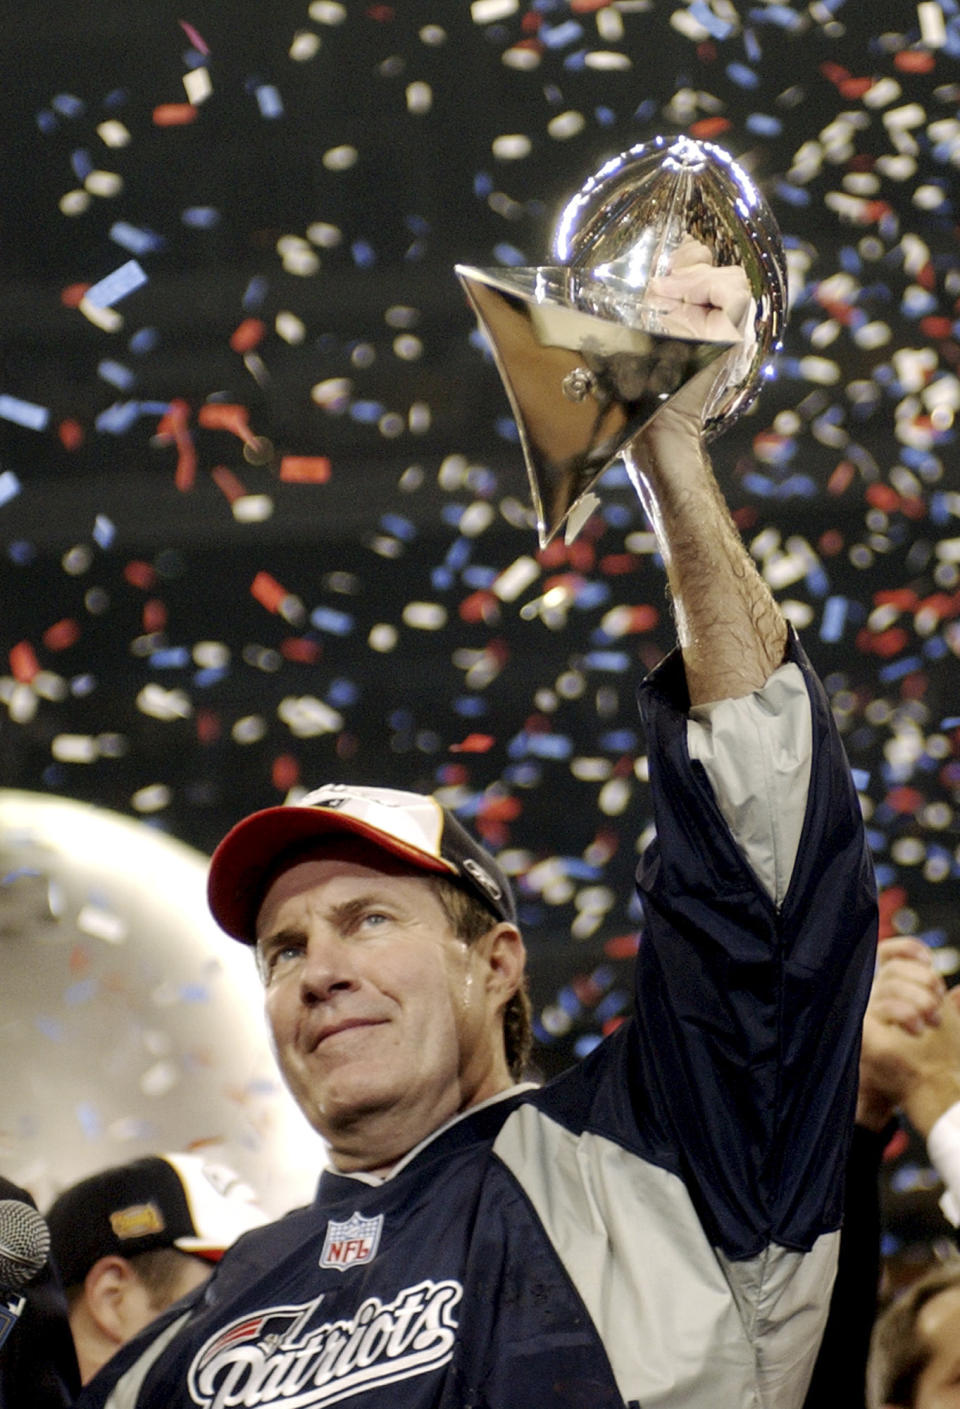 FILE - New England Patriots coach Bill Belichick holds the Vince Lombardi Trophy after the Patriots beat the Carolina Panthers 32-29 in Super Bowl XXXVIII in Houston, Texas, Feb. 1, 2004. Six-time NFL champion Bill Belichick has agreed to part ways as the coach of the New England Patriots on Thursday, Jan. 11, 2024, bringing an end to his 24-year tenure as the architect of the most decorated dynasty of the league’s Super Bowl era, a source told the Associated Press on the condition of anonymity because it has not yet been announced. (AP Photo/Dave Martin, File)